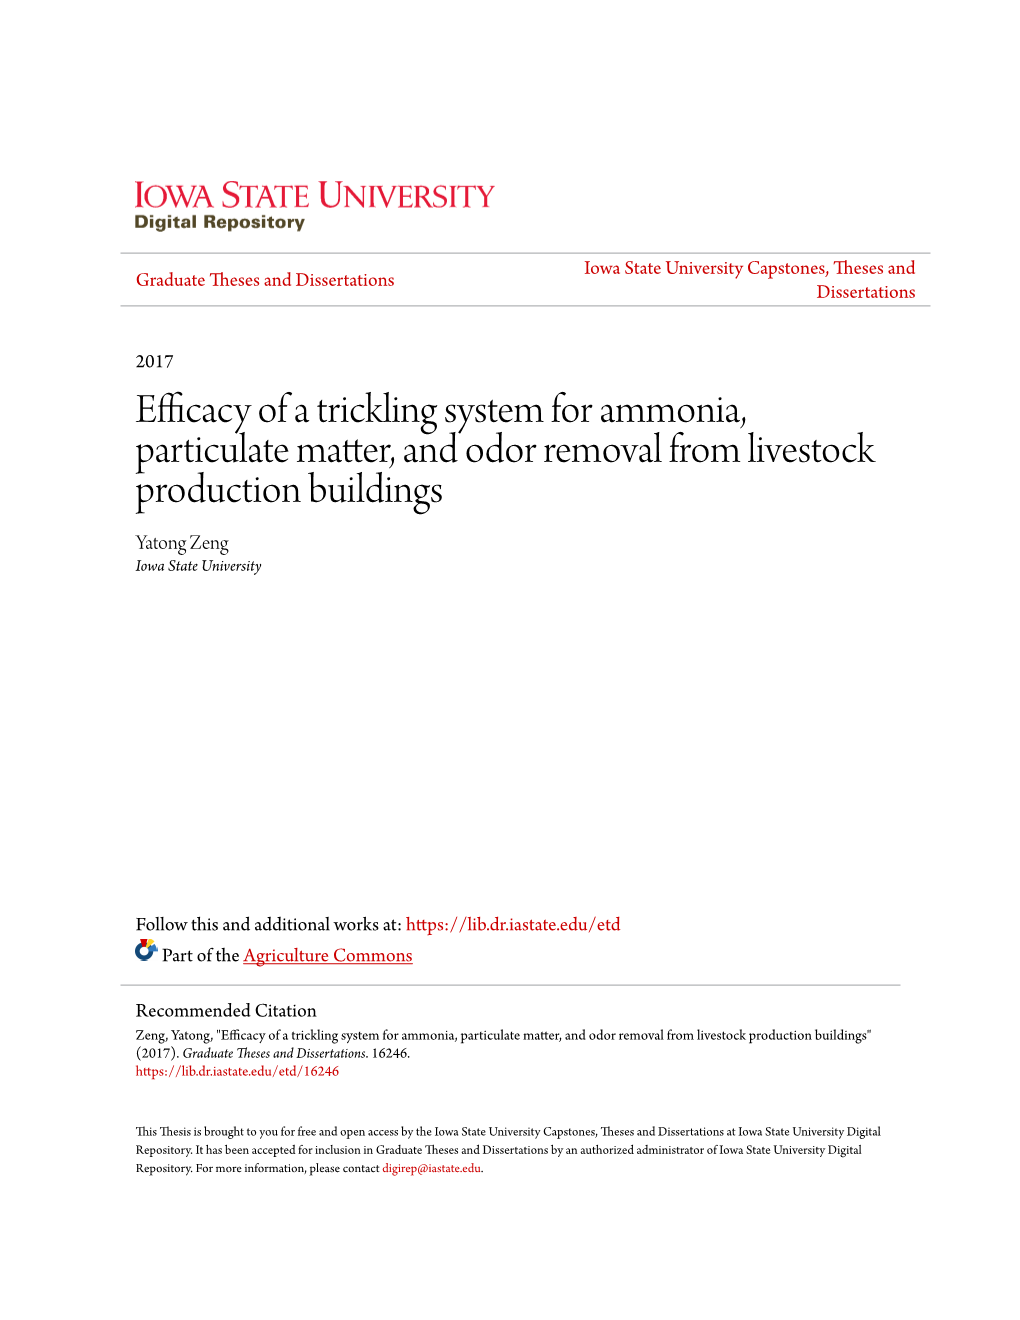 Efficacy of a Trickling System for Ammonia, Particulate Matter, and Odor Removal from Livestock Production Buildings Yatong Zeng Iowa State University